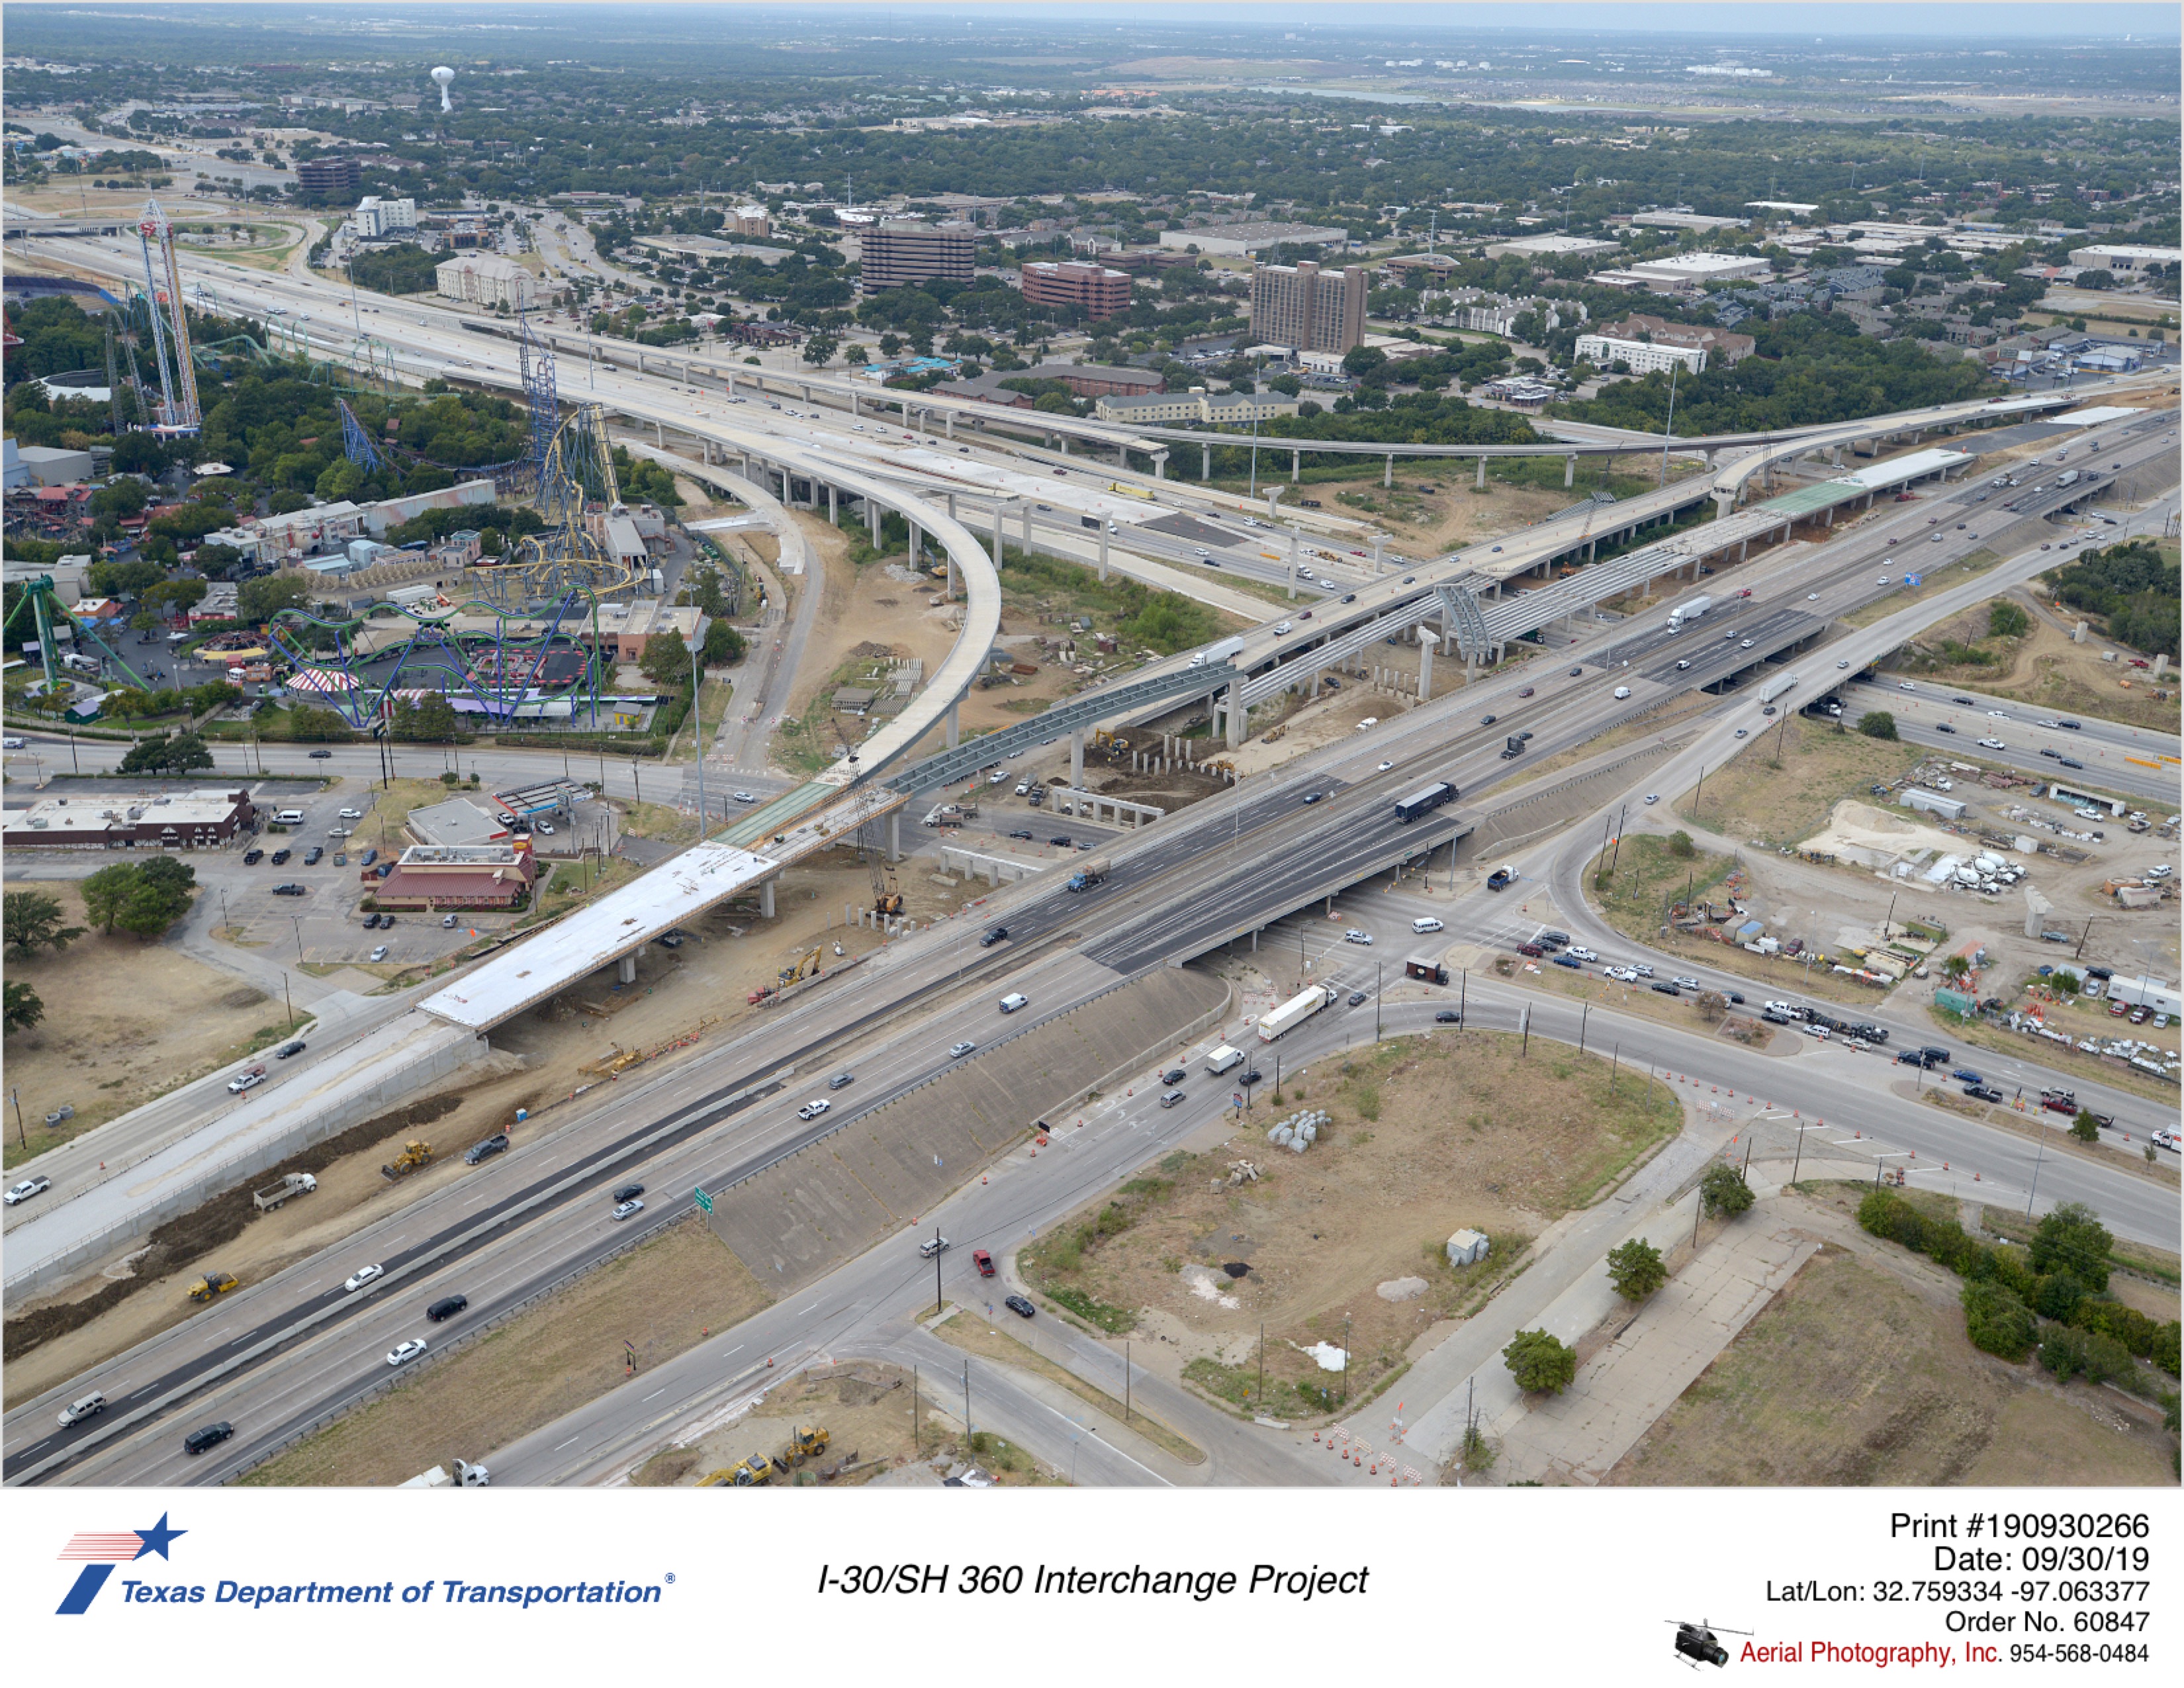 I-30/SH 360 interchange looking northwest with Six Flags Dr interchange in foreground.